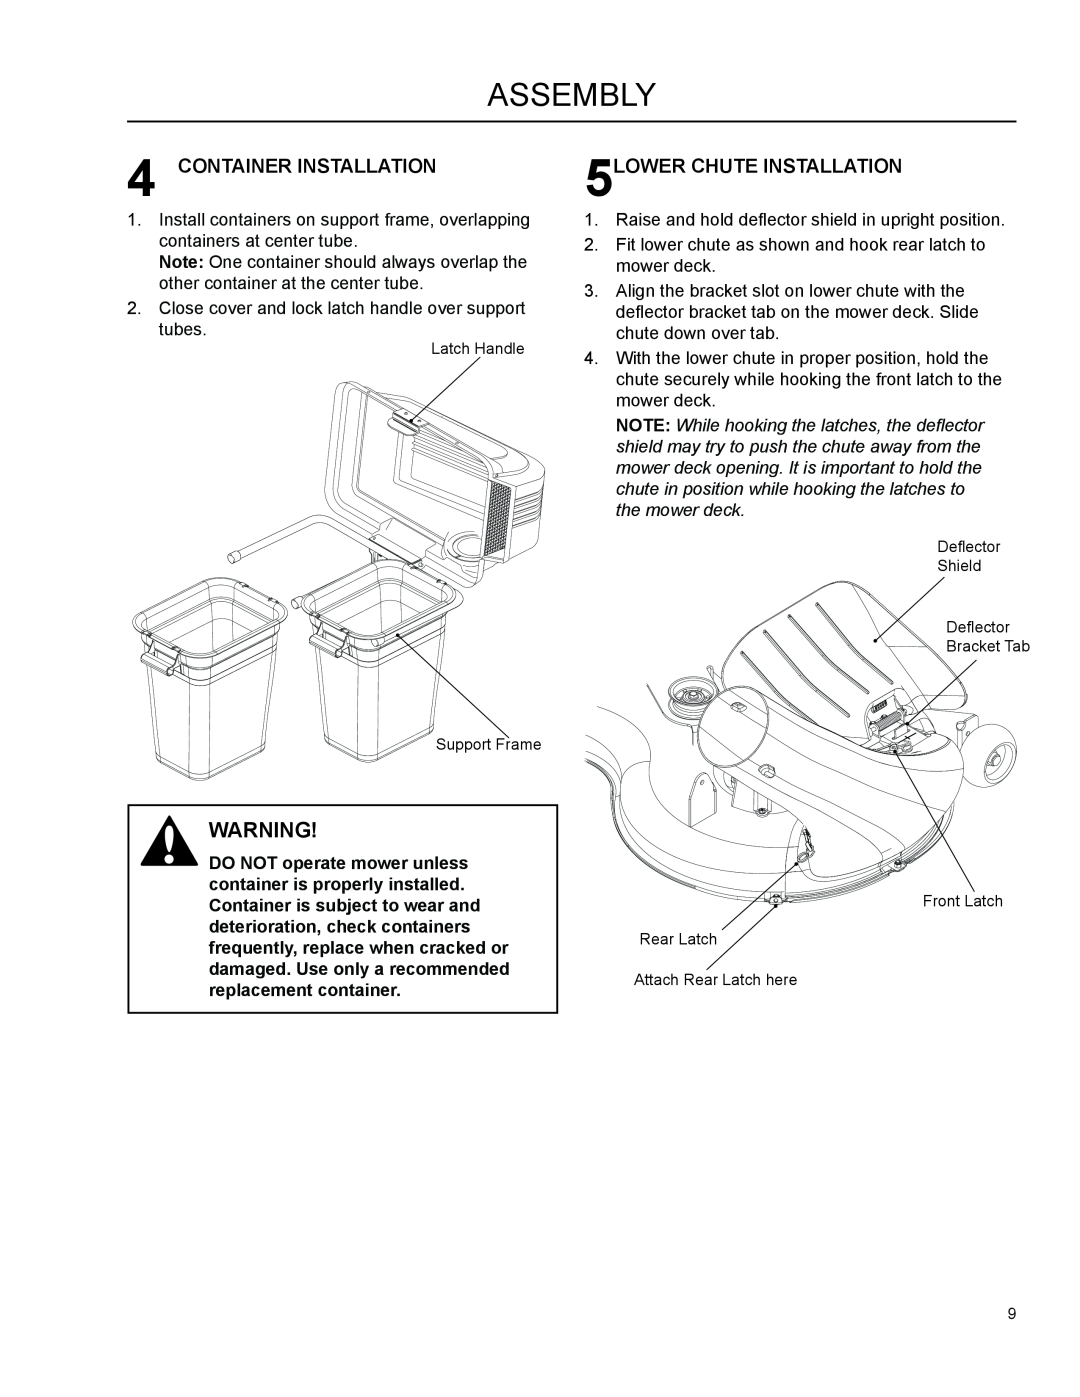 Dixon 966004101 manual Container Installation, 5LOWER CHUTE INSTALLATION, Assembly 